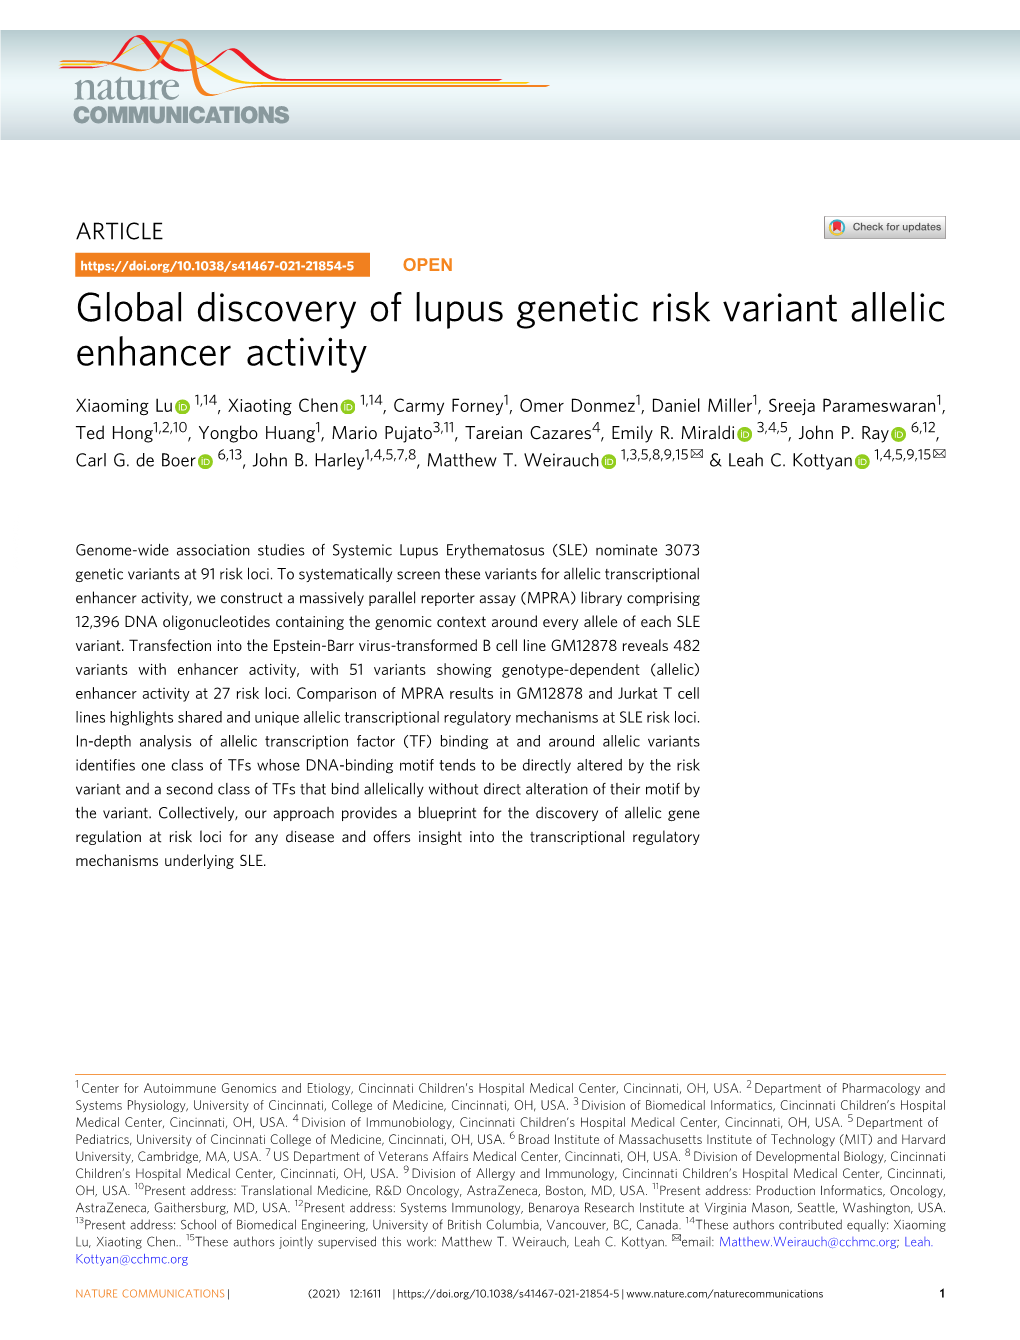 Global Discovery of Lupus Genetic Risk Variant Allelic Enhancer Activity